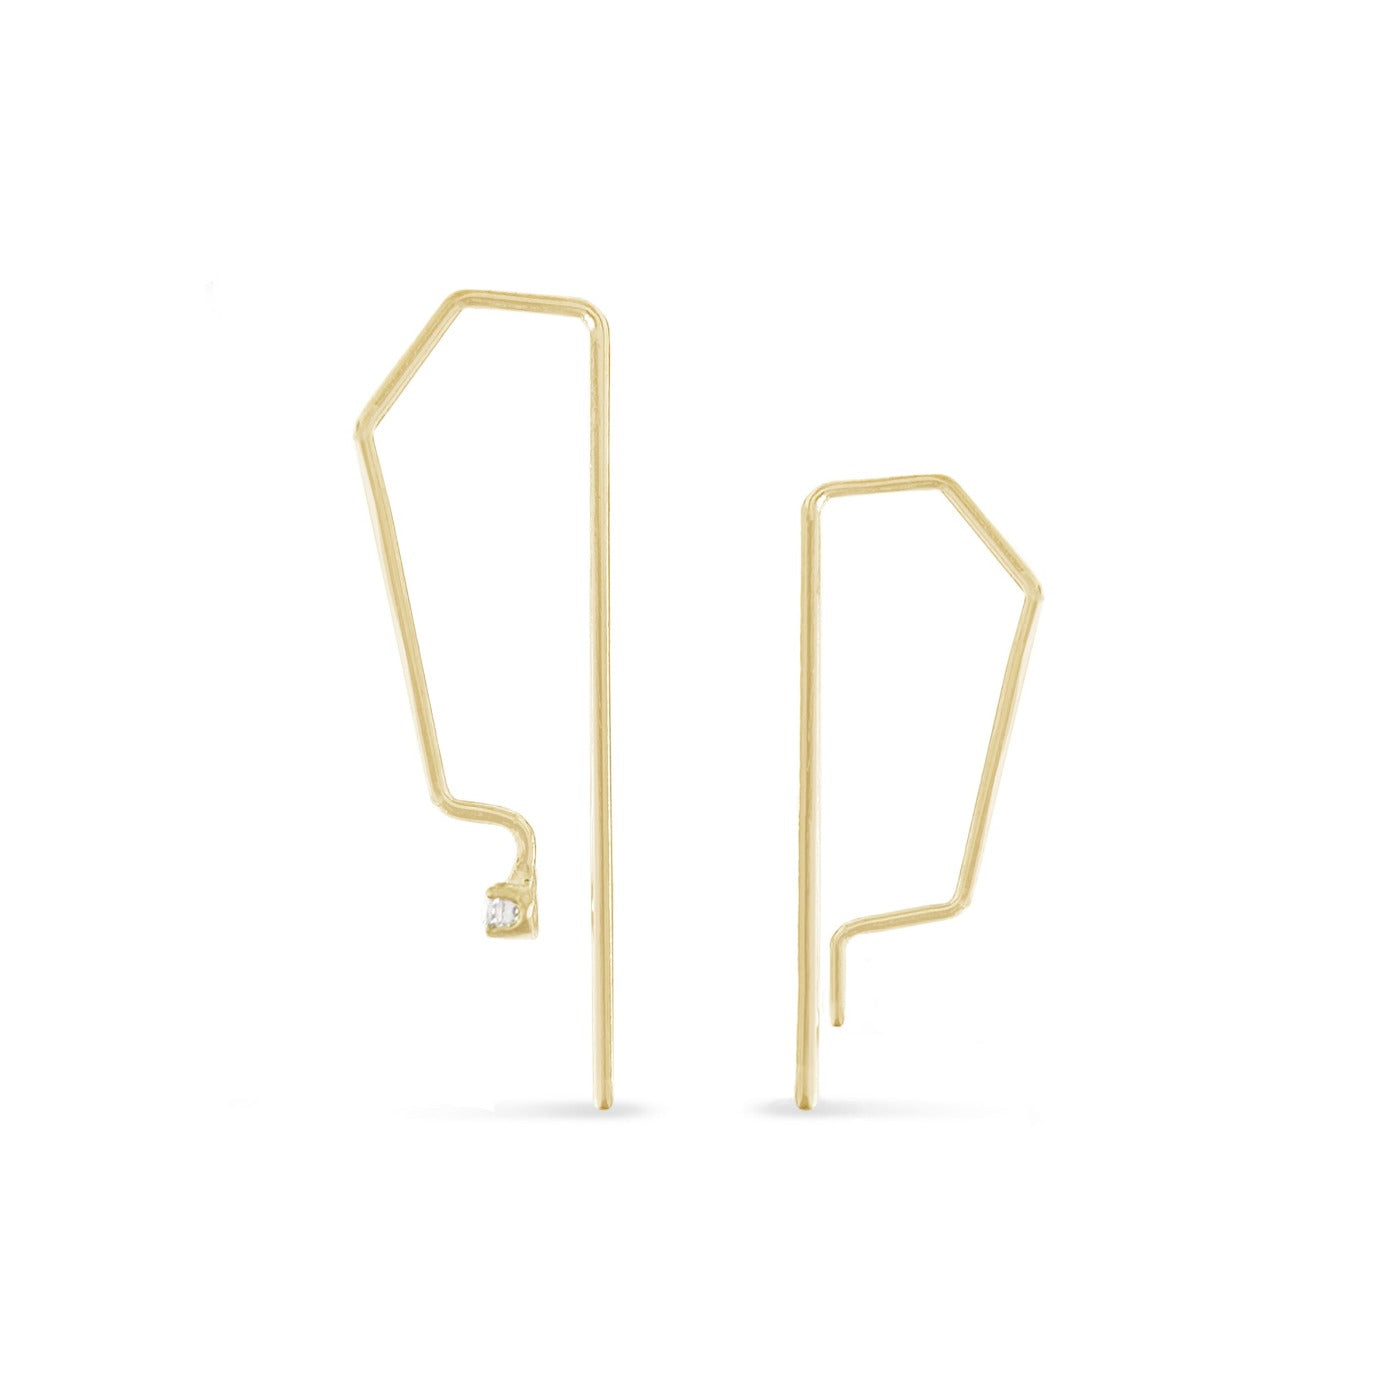 Geometric half hexagon delicate 14K gold micro hoops side by size showing size difference